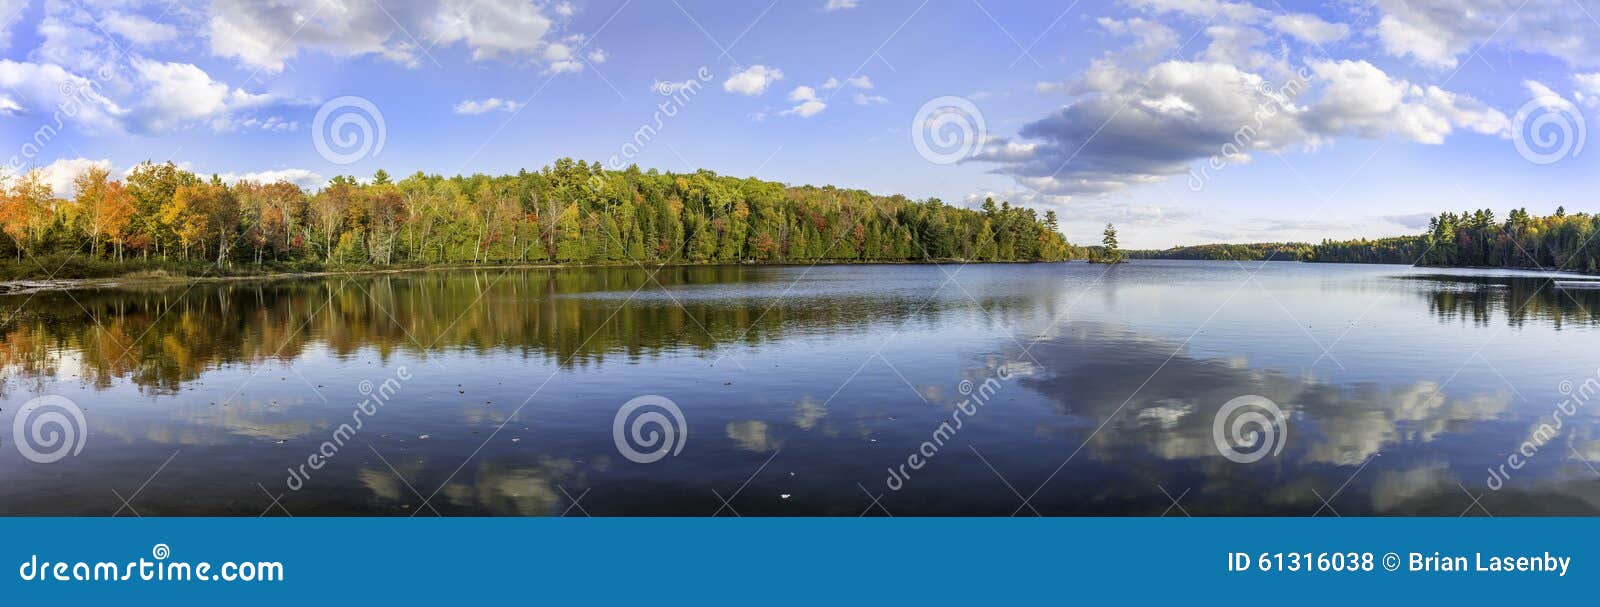 panorama of a lake in autumn - ontario, canada